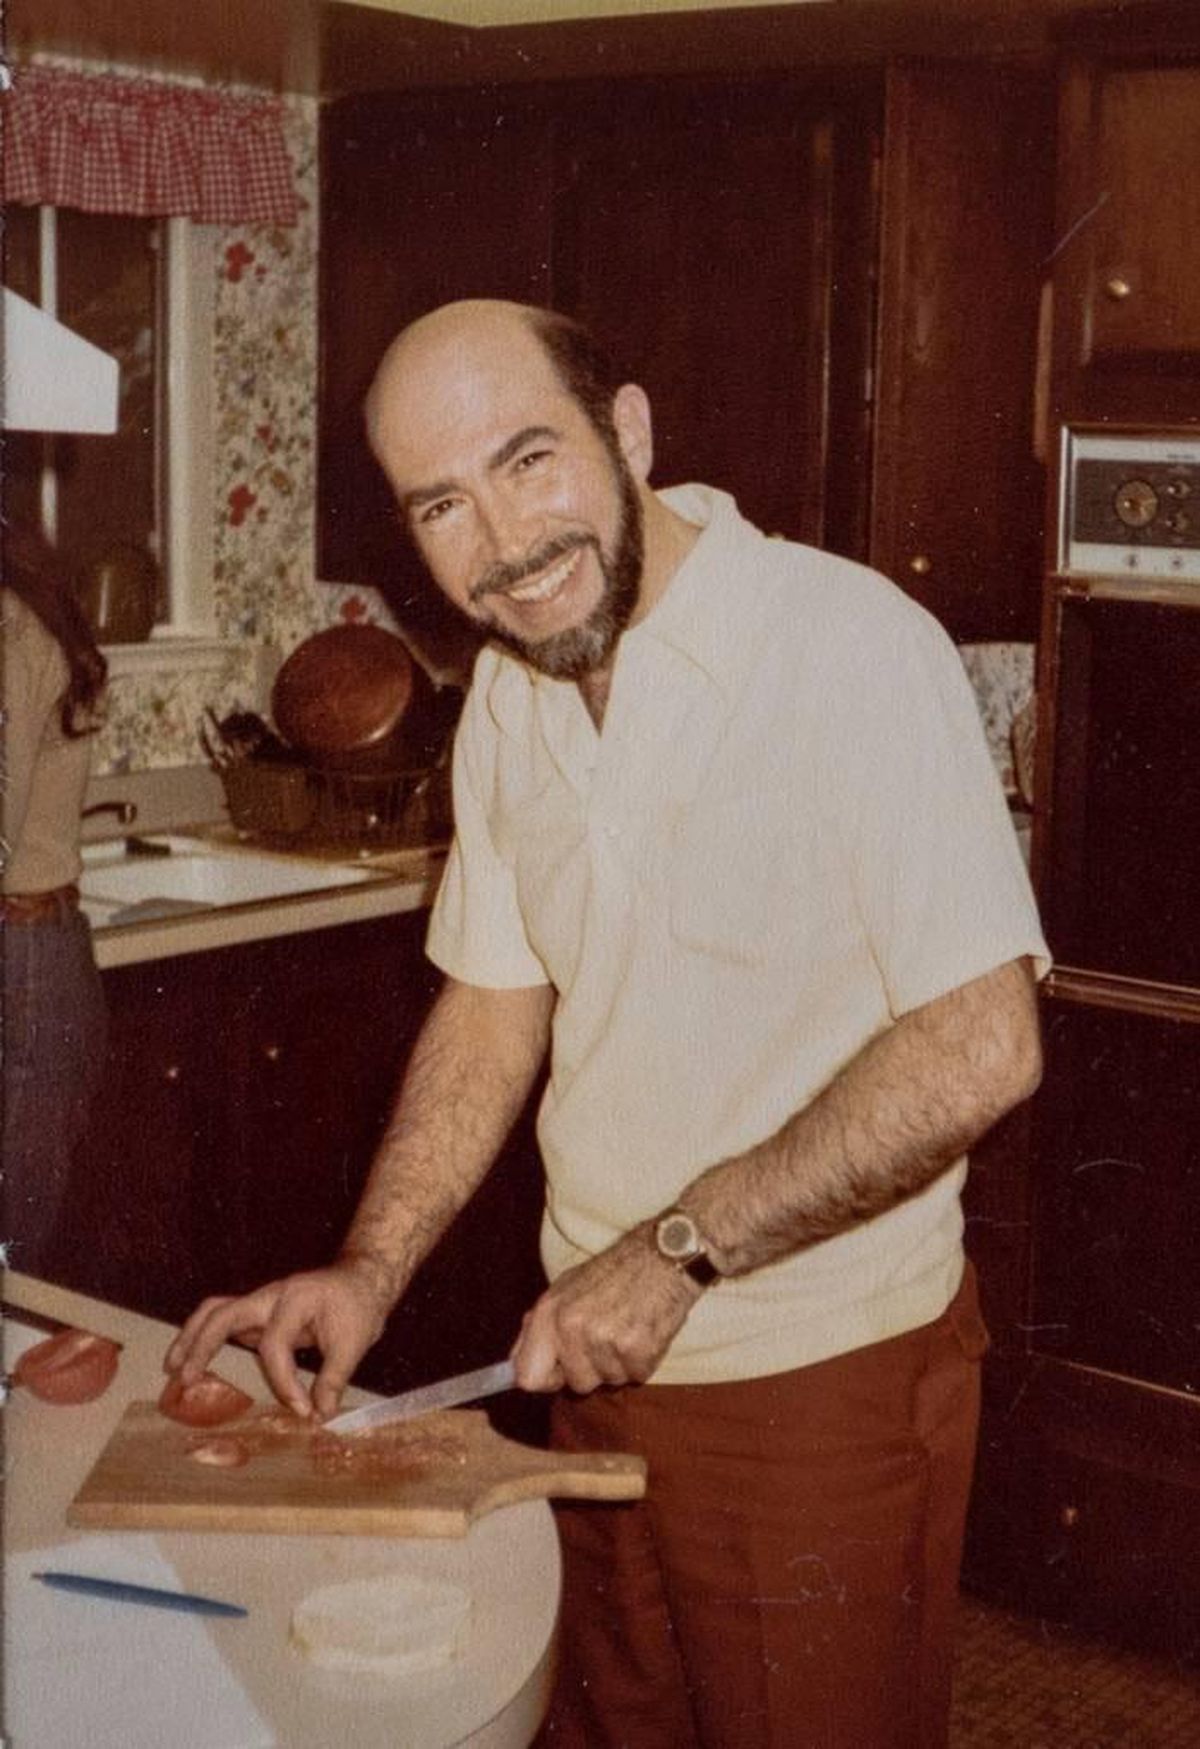 Arnold Ismach was former dean of the University of Oregon School of Journalism. He was known for delivering his hand-wrapped caramels to the friend and colleagues in Eugene around Christmas. (Courtesy Photo) (COURTESY PHOTO / COURTESY PHOTO)